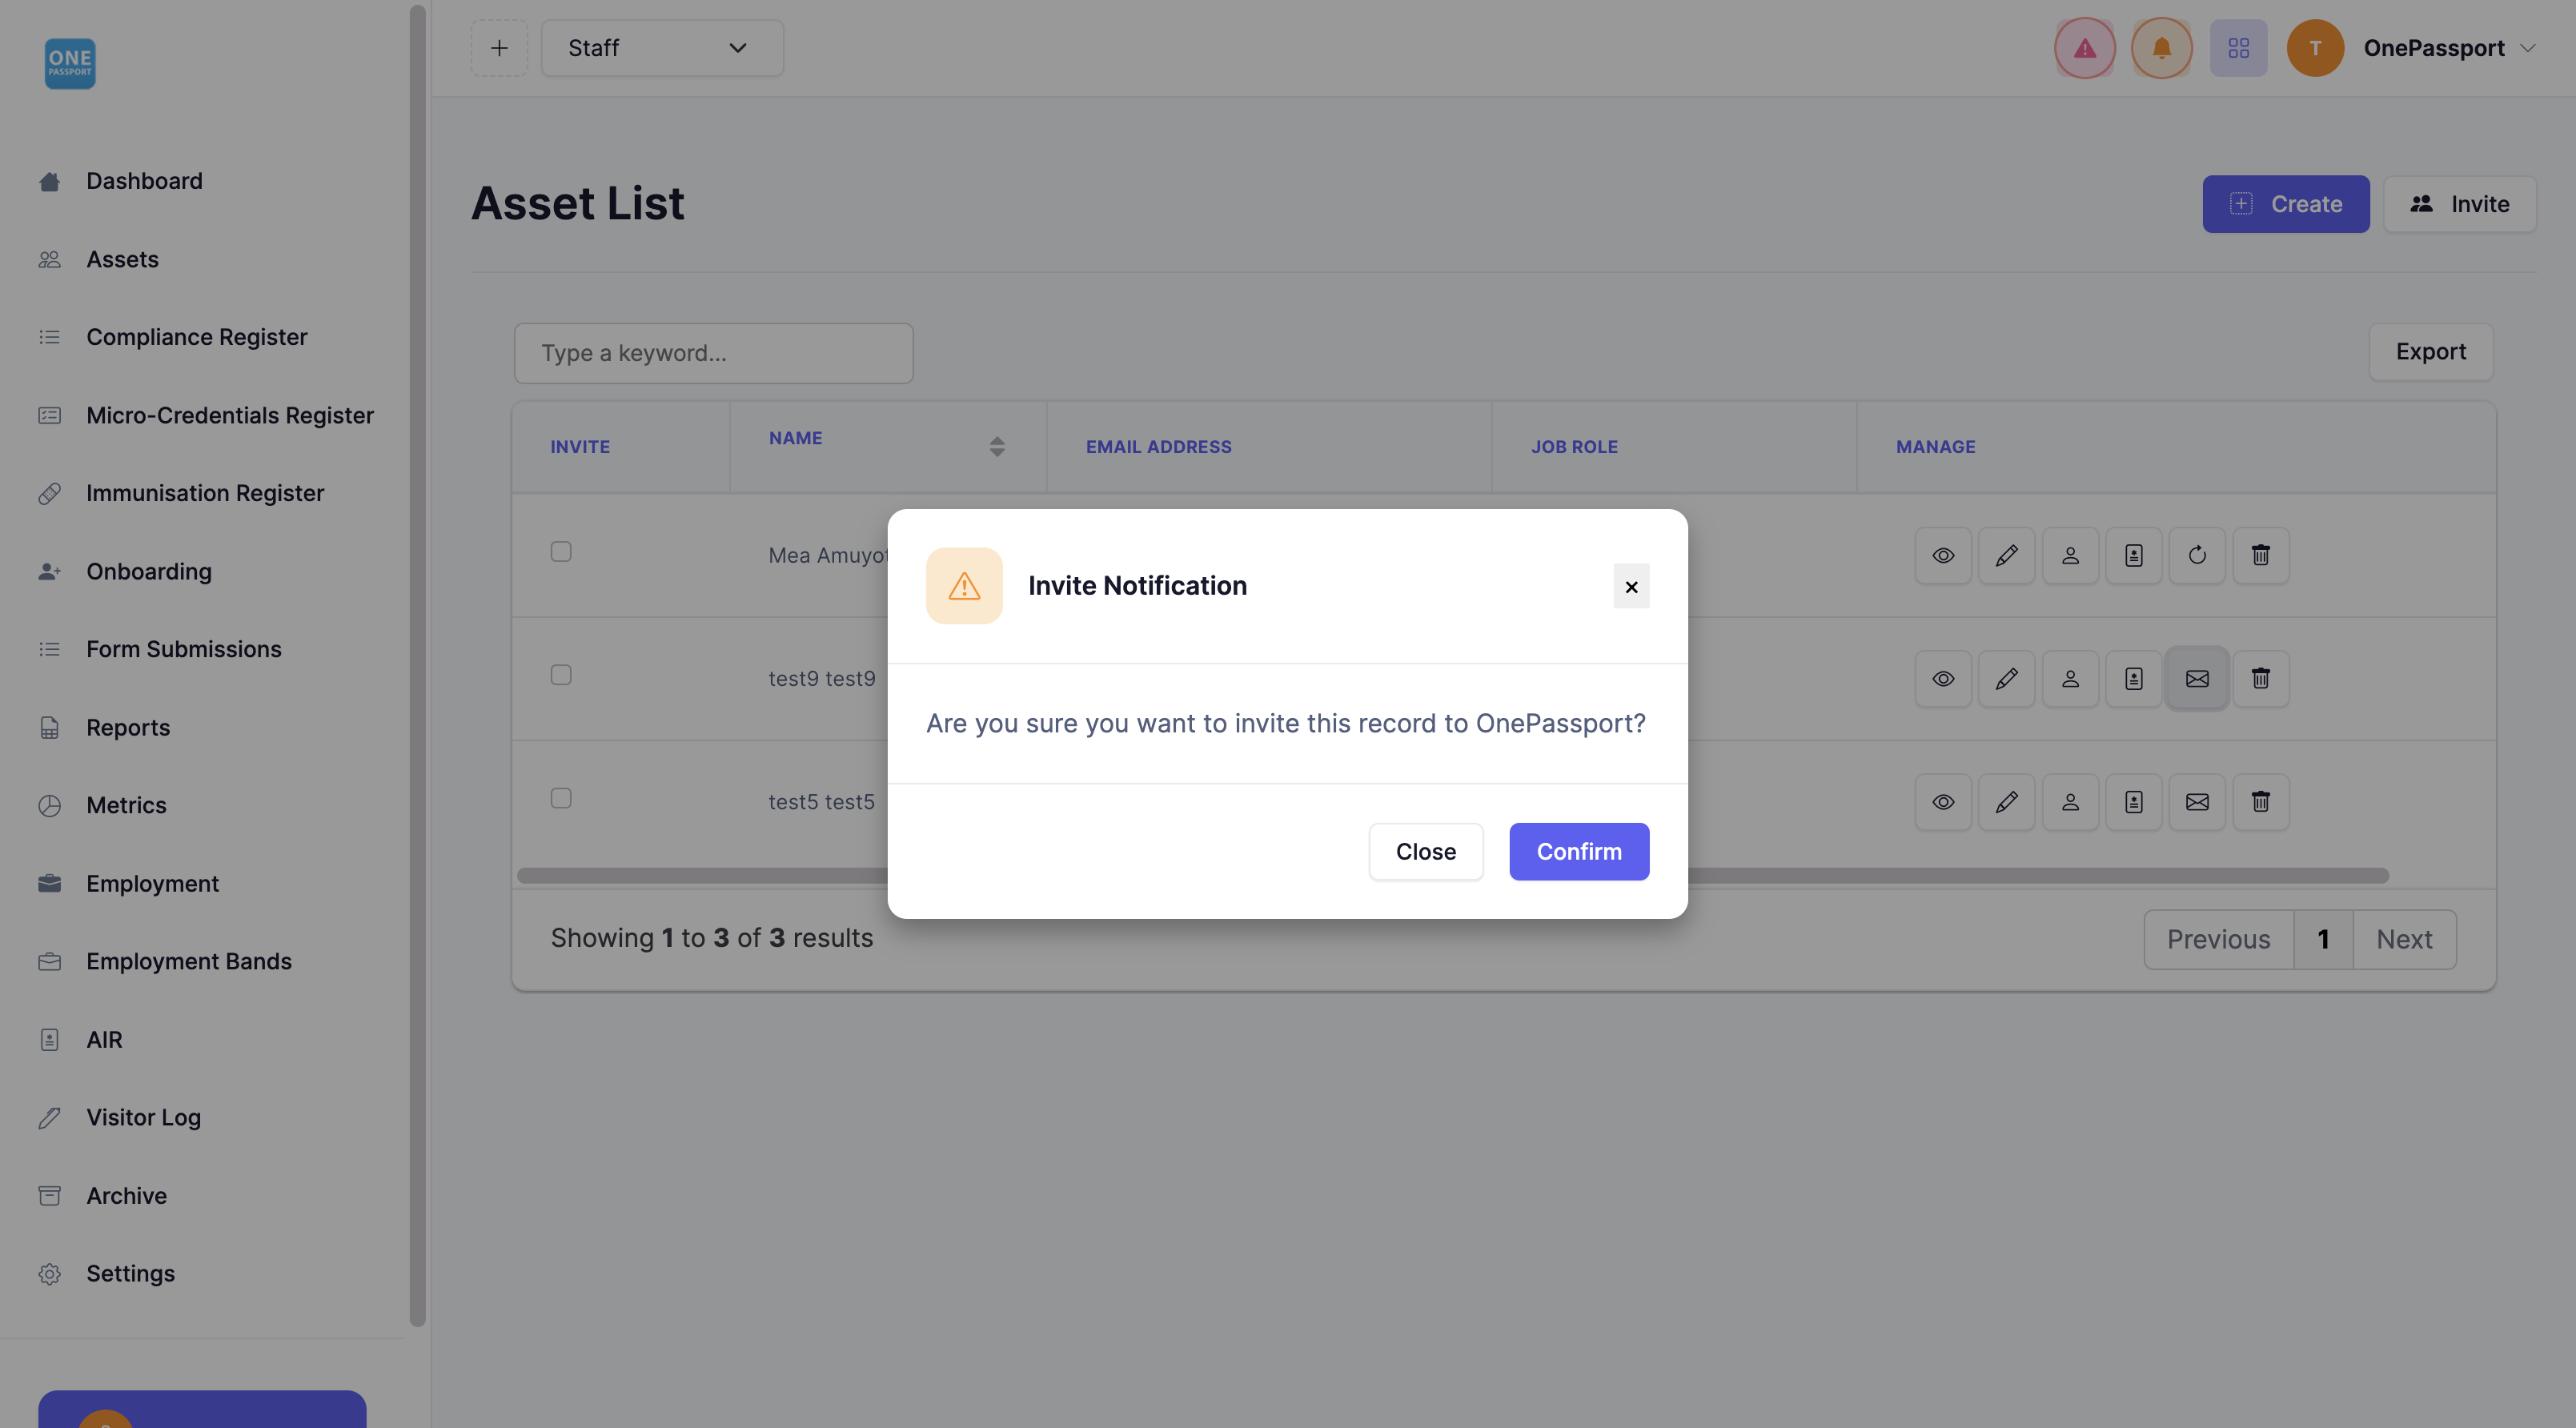 The system will ask for confirmation that you want to invite the employee. Click the Invite button to complete.